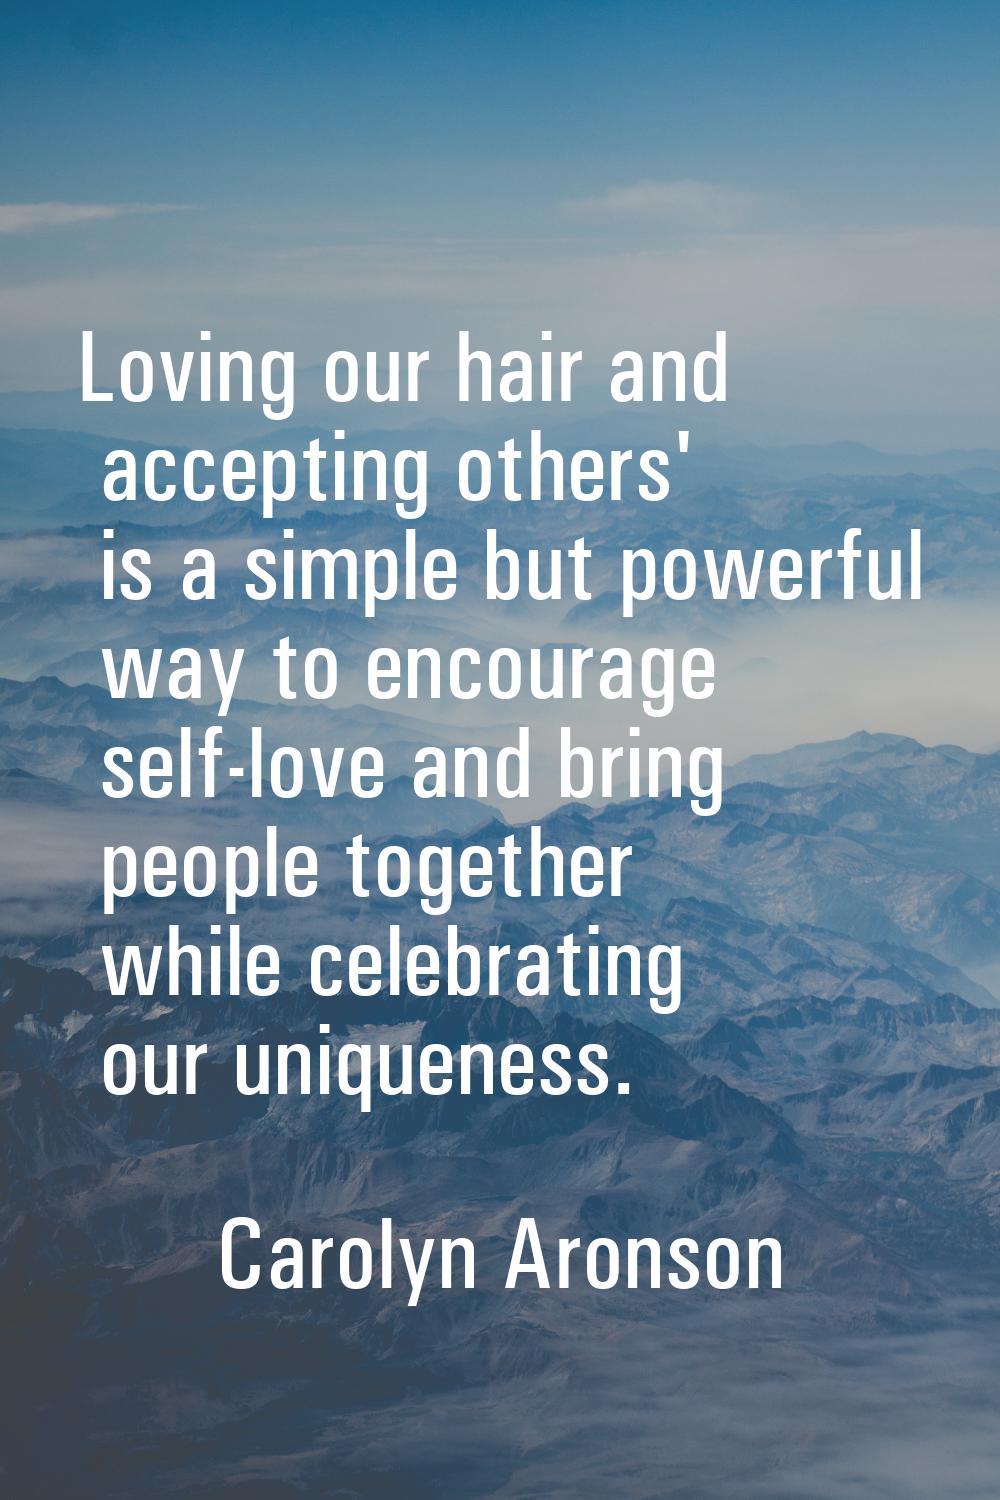 Loving our hair and accepting others' is a simple but powerful way to encourage self-love and bring